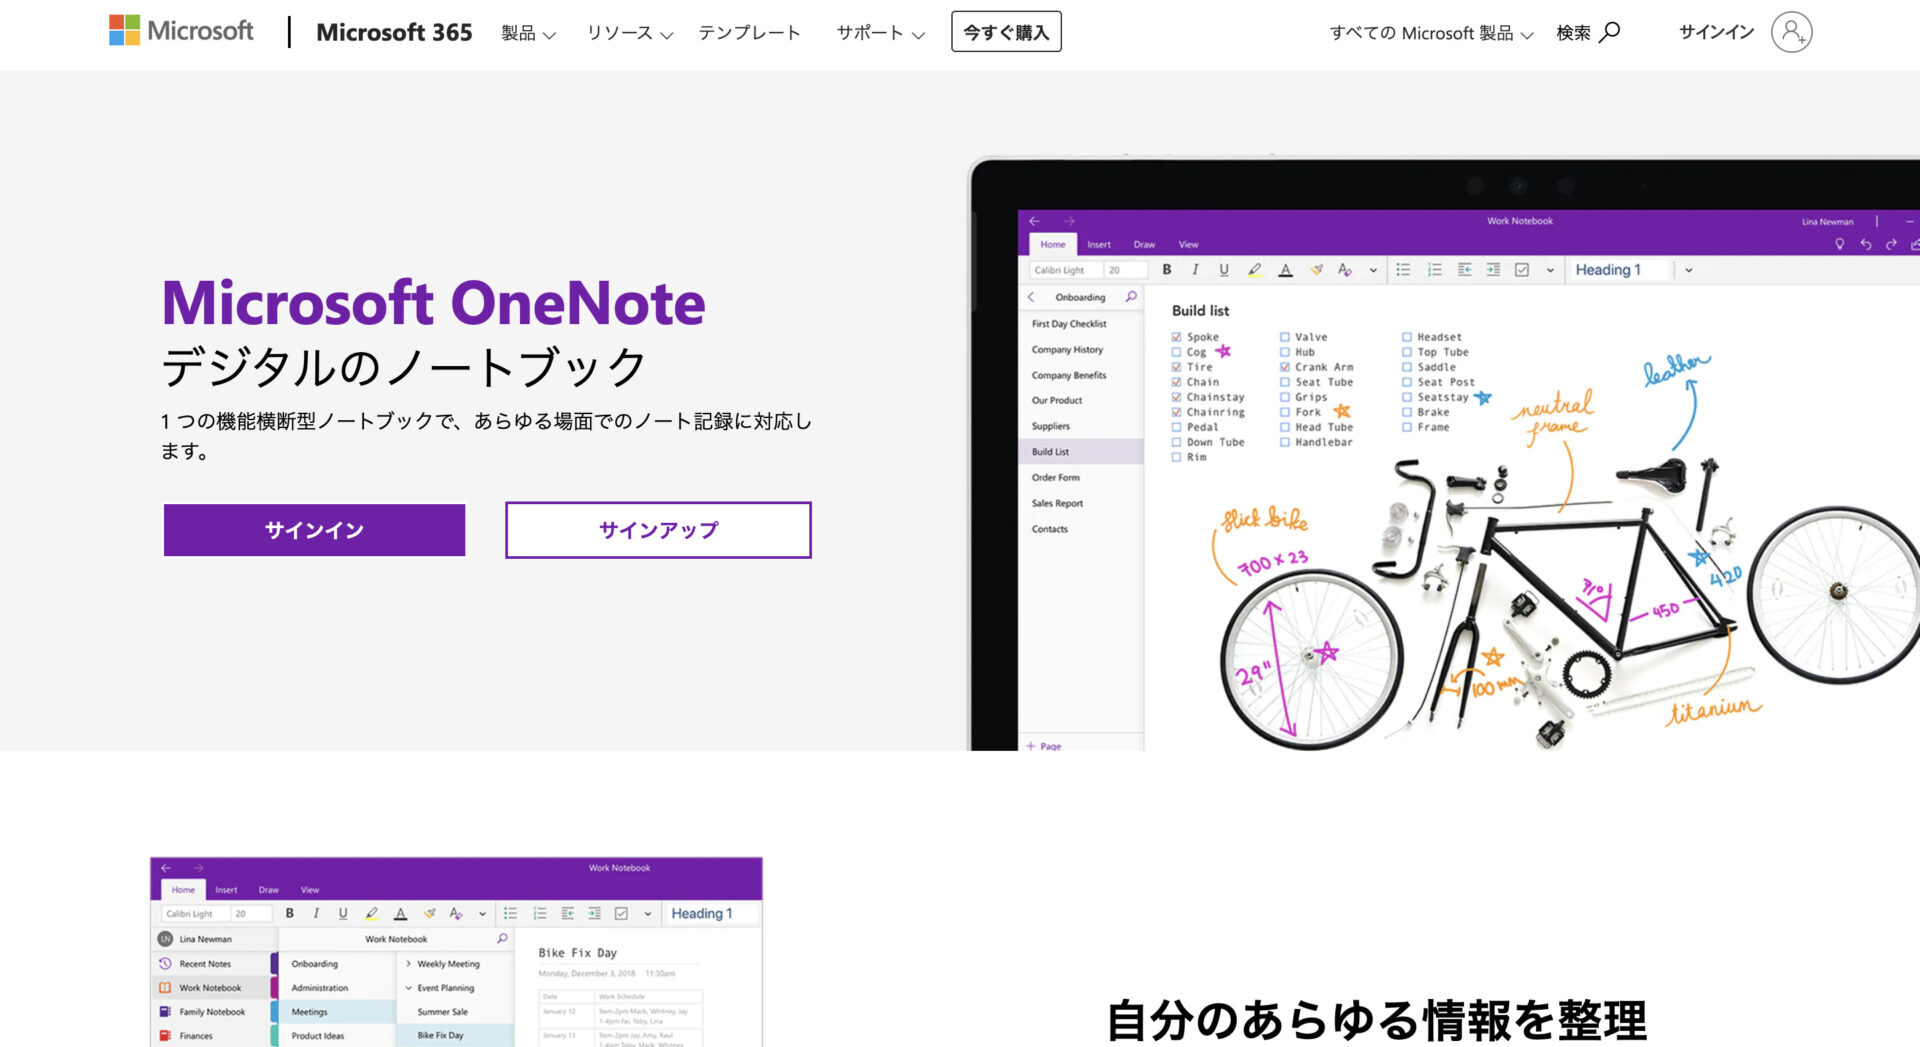 Top page of OneNote